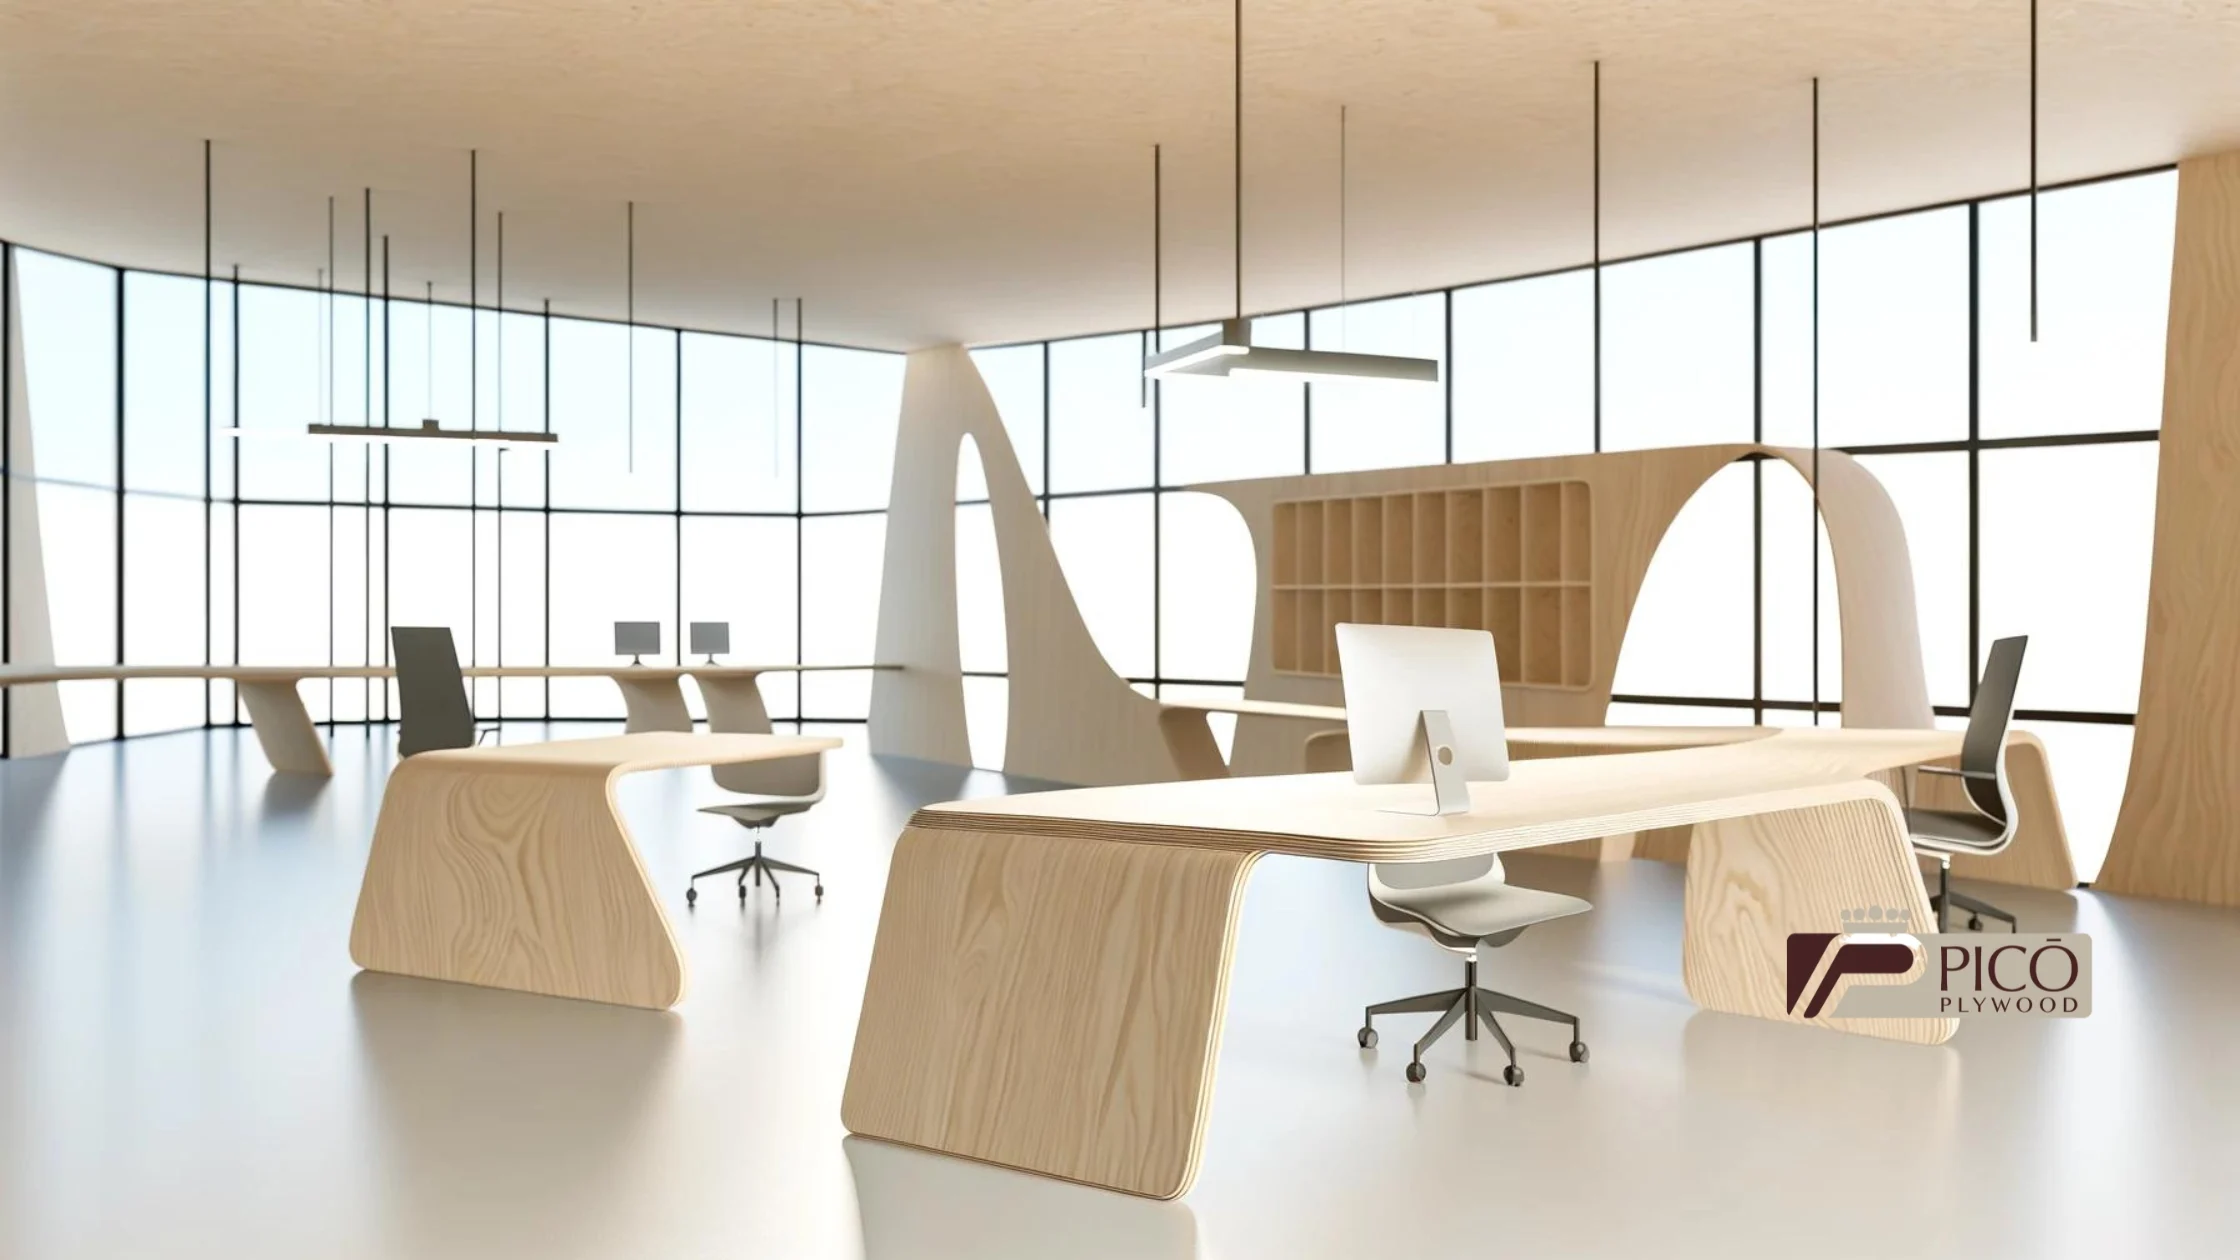 Plywood Supplier • Picó Plywood • Blog • Flexible Plywood Uses Office Chair